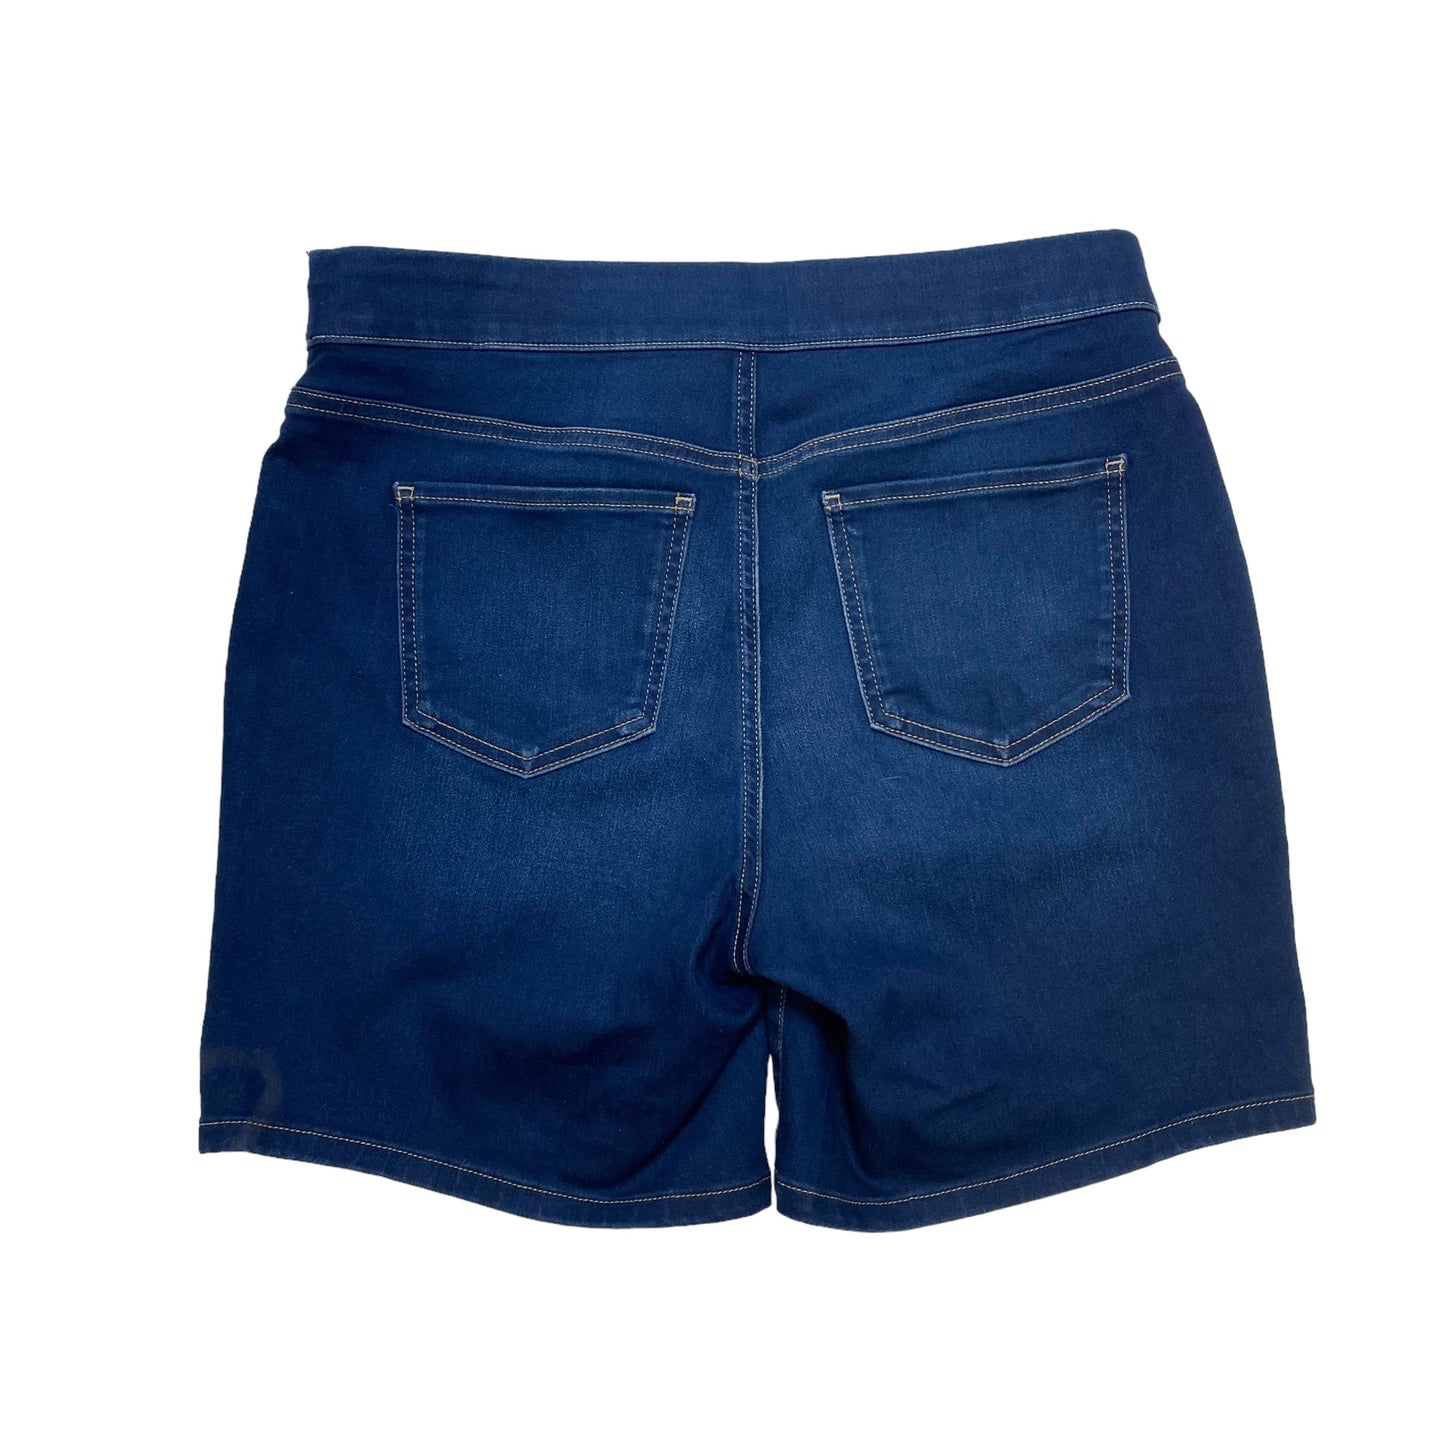 Blue Shorts New Directions, Size 12